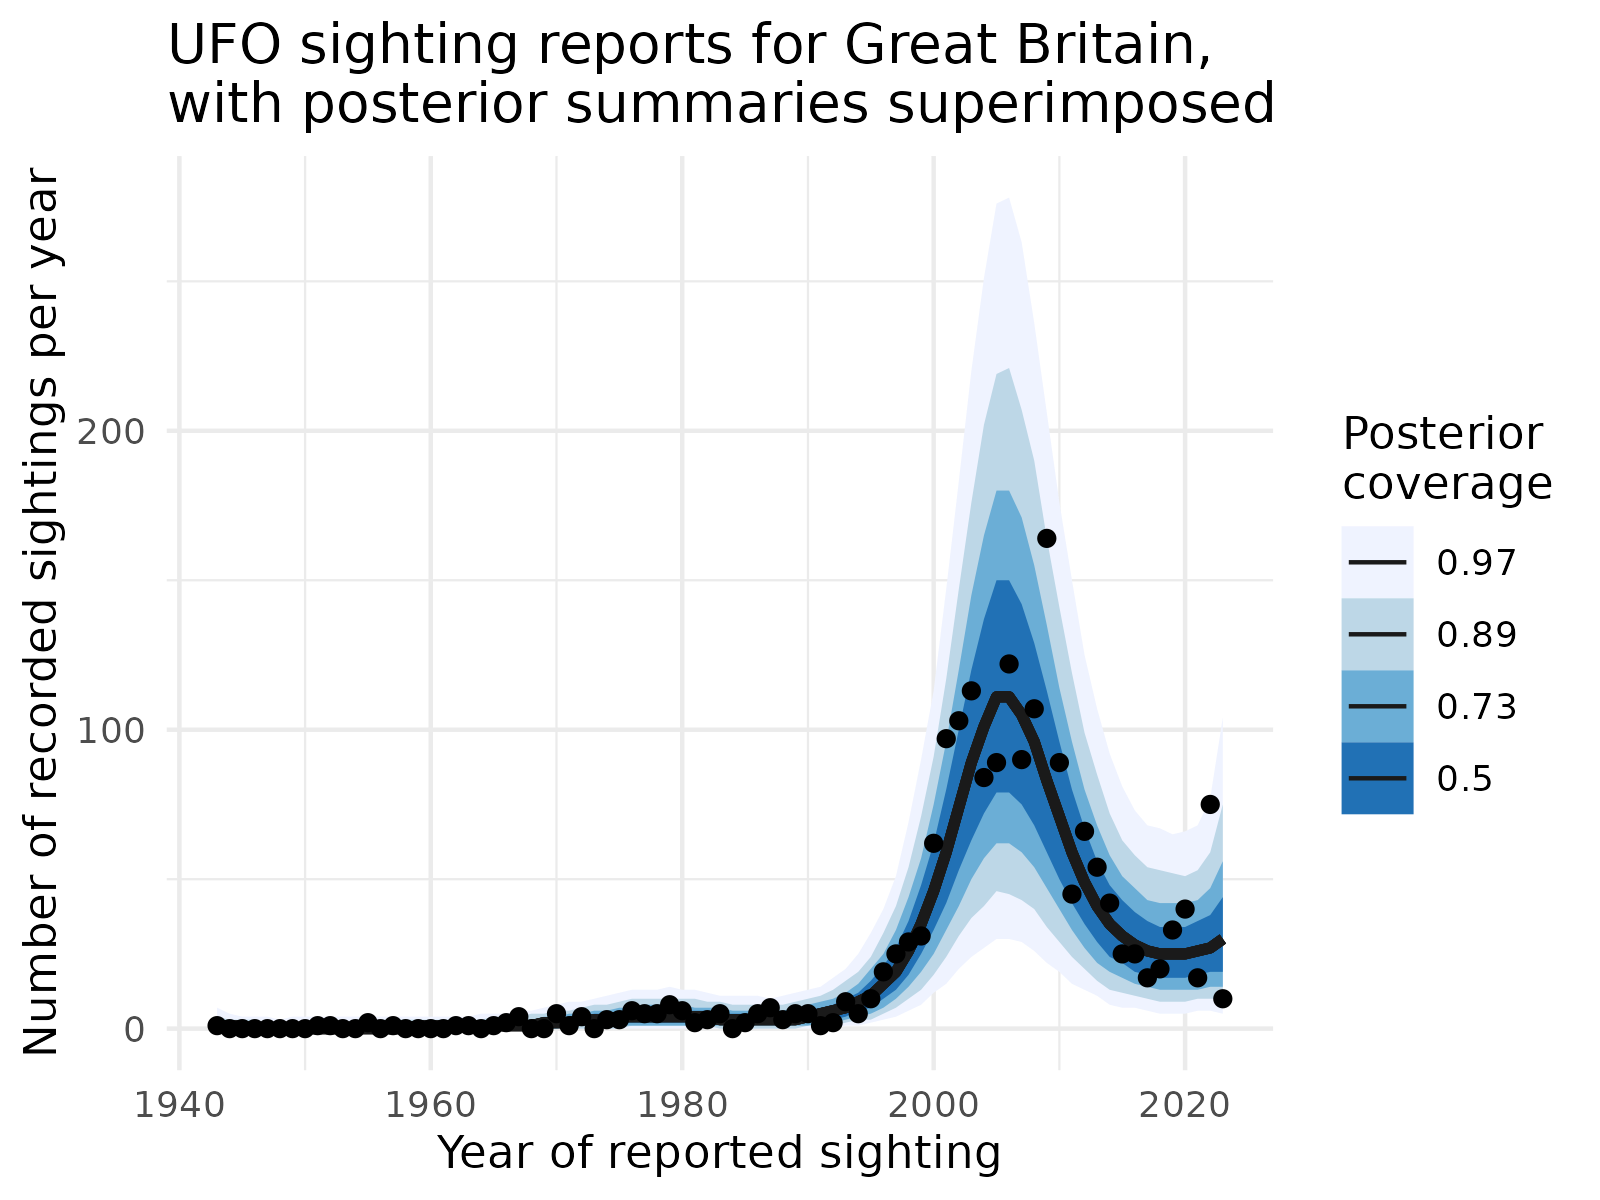 The scatter plot (time series) showing the number of reported UFO sightings (worldwide) from the year 1943 to 2023. The plot has the posterior median and 50%, 73%, 89% and 97% posterior predictive bands superimposed in blue shades. The median line is approximately flat from year = 1943 to year = 1990, and the predictive bands are narrow. After 1990, the predictive bands widen considerably and the trend line rises sharply until about year = 2005, when the median line sharply plummets and the predictive bands become narrower. The median line levels out by 2022.